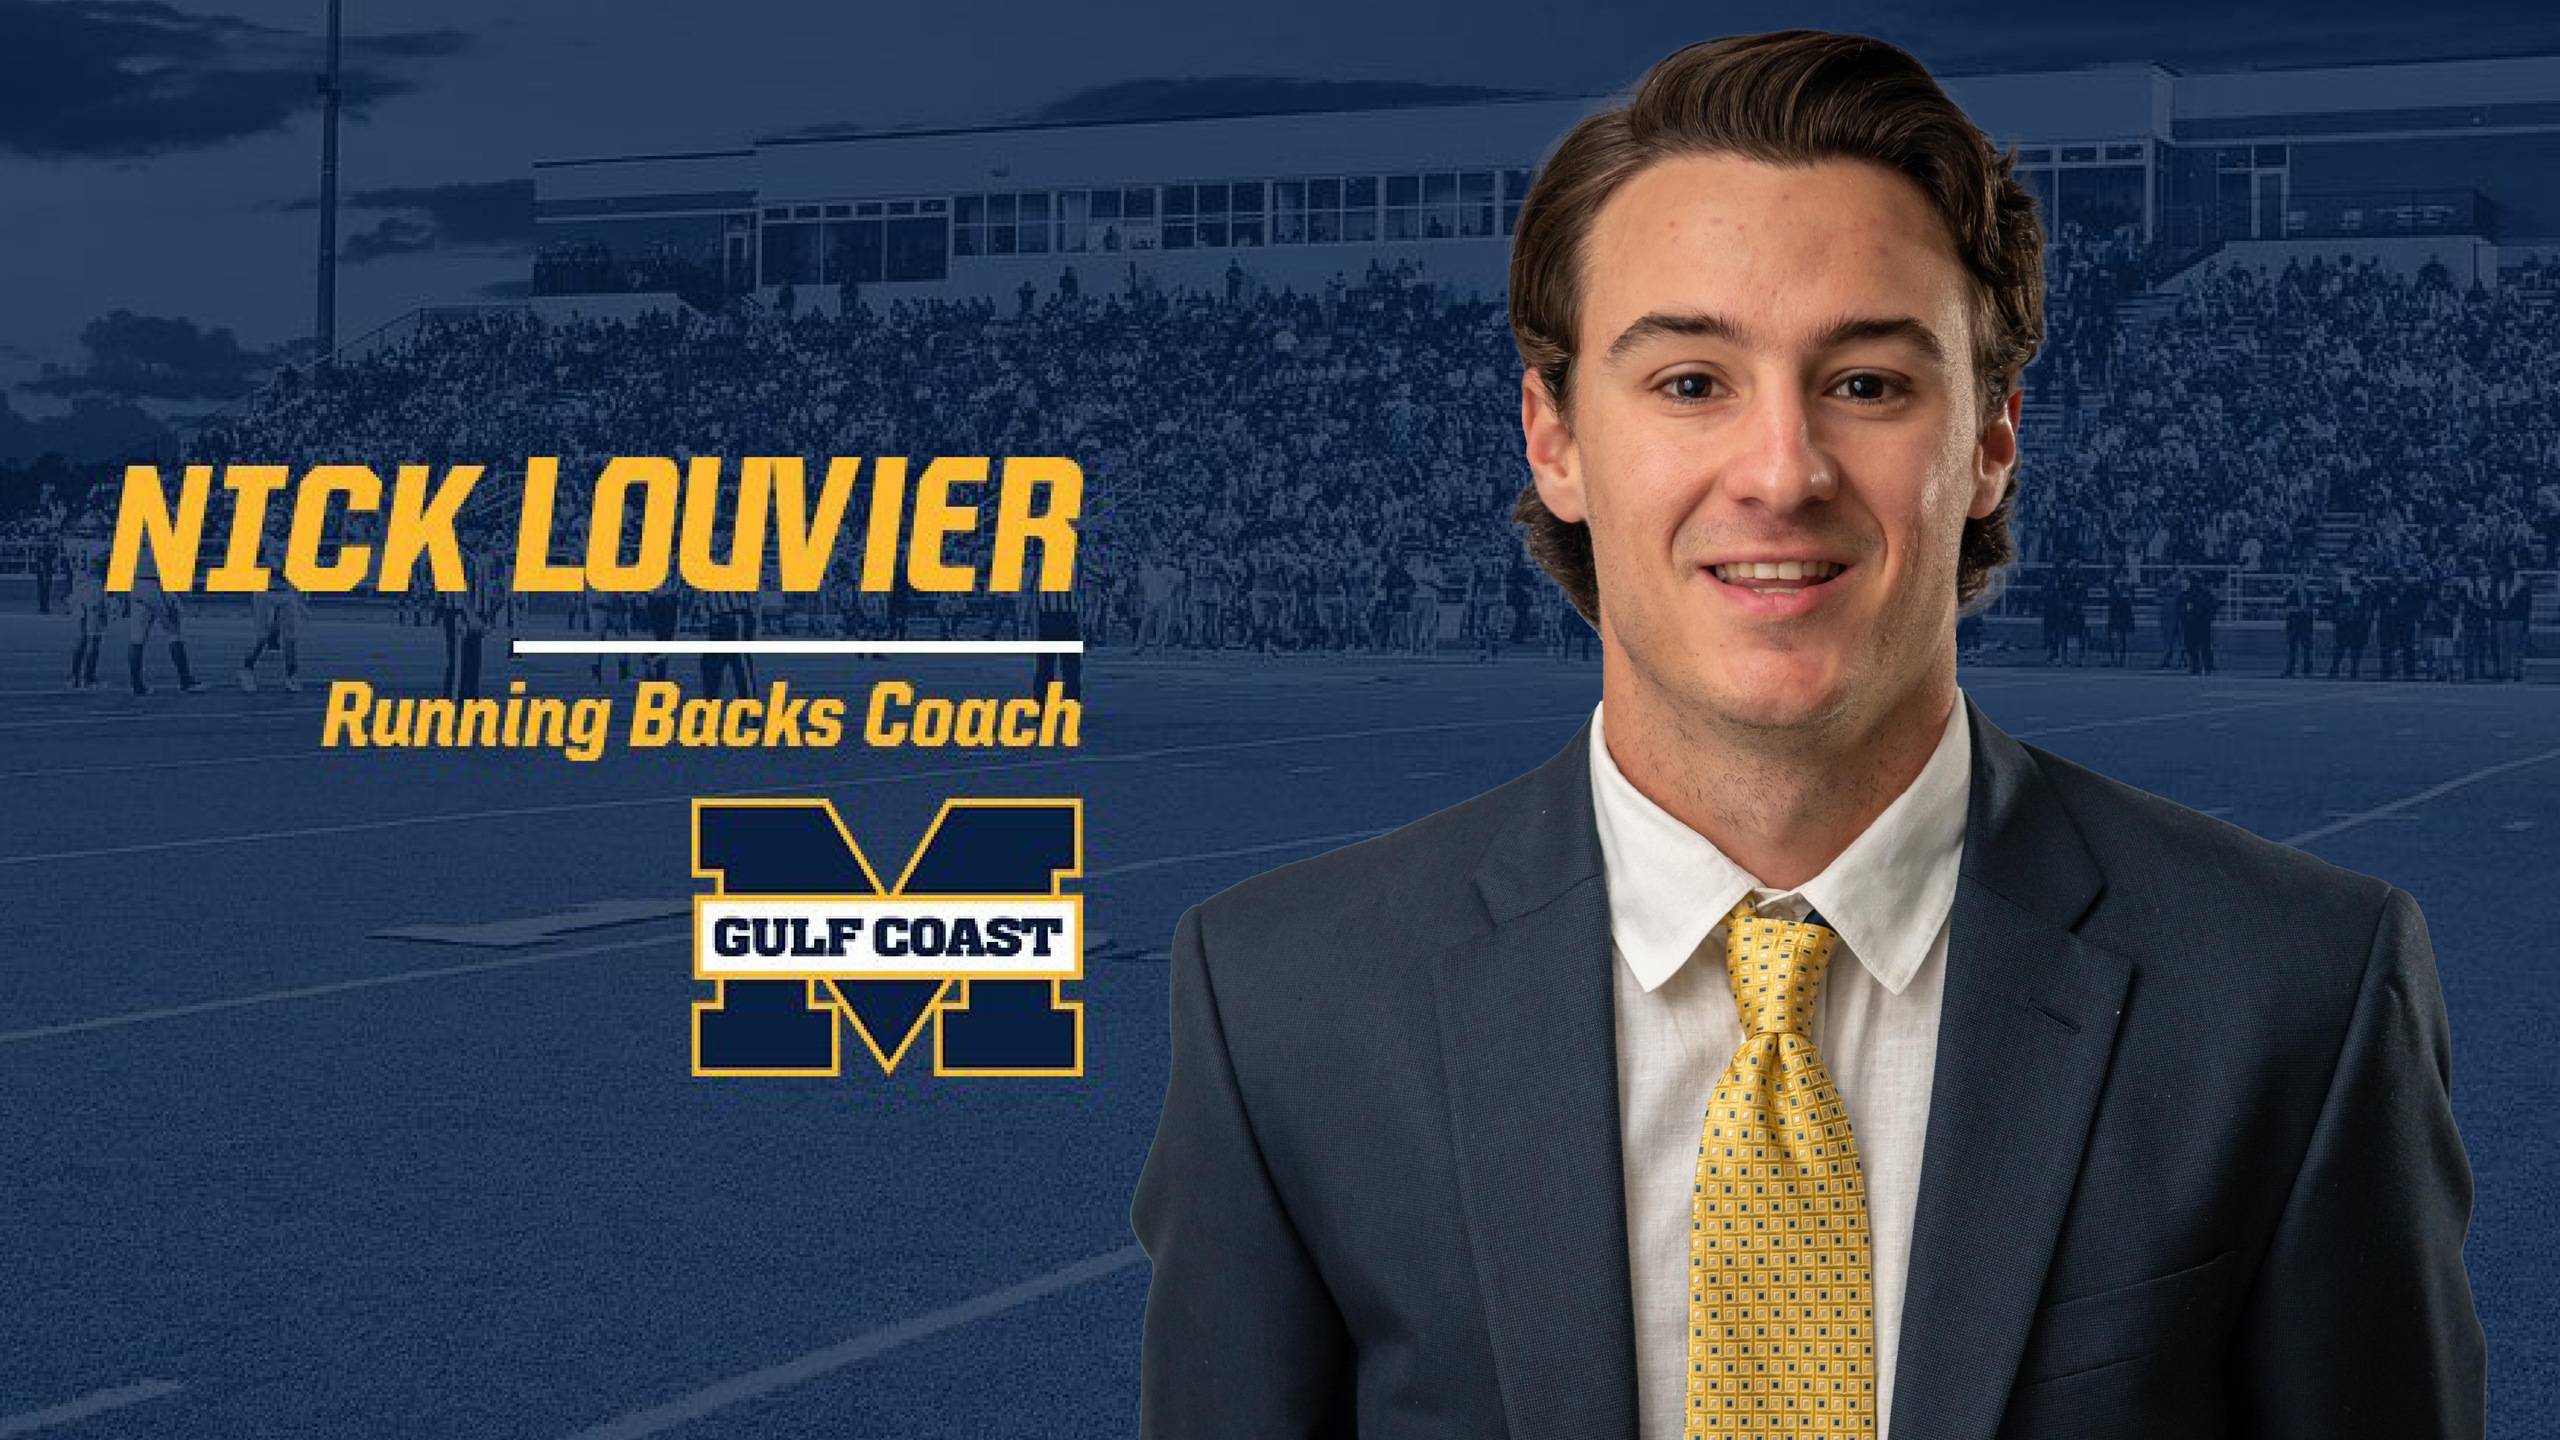 Louvier joins MGCCC staff